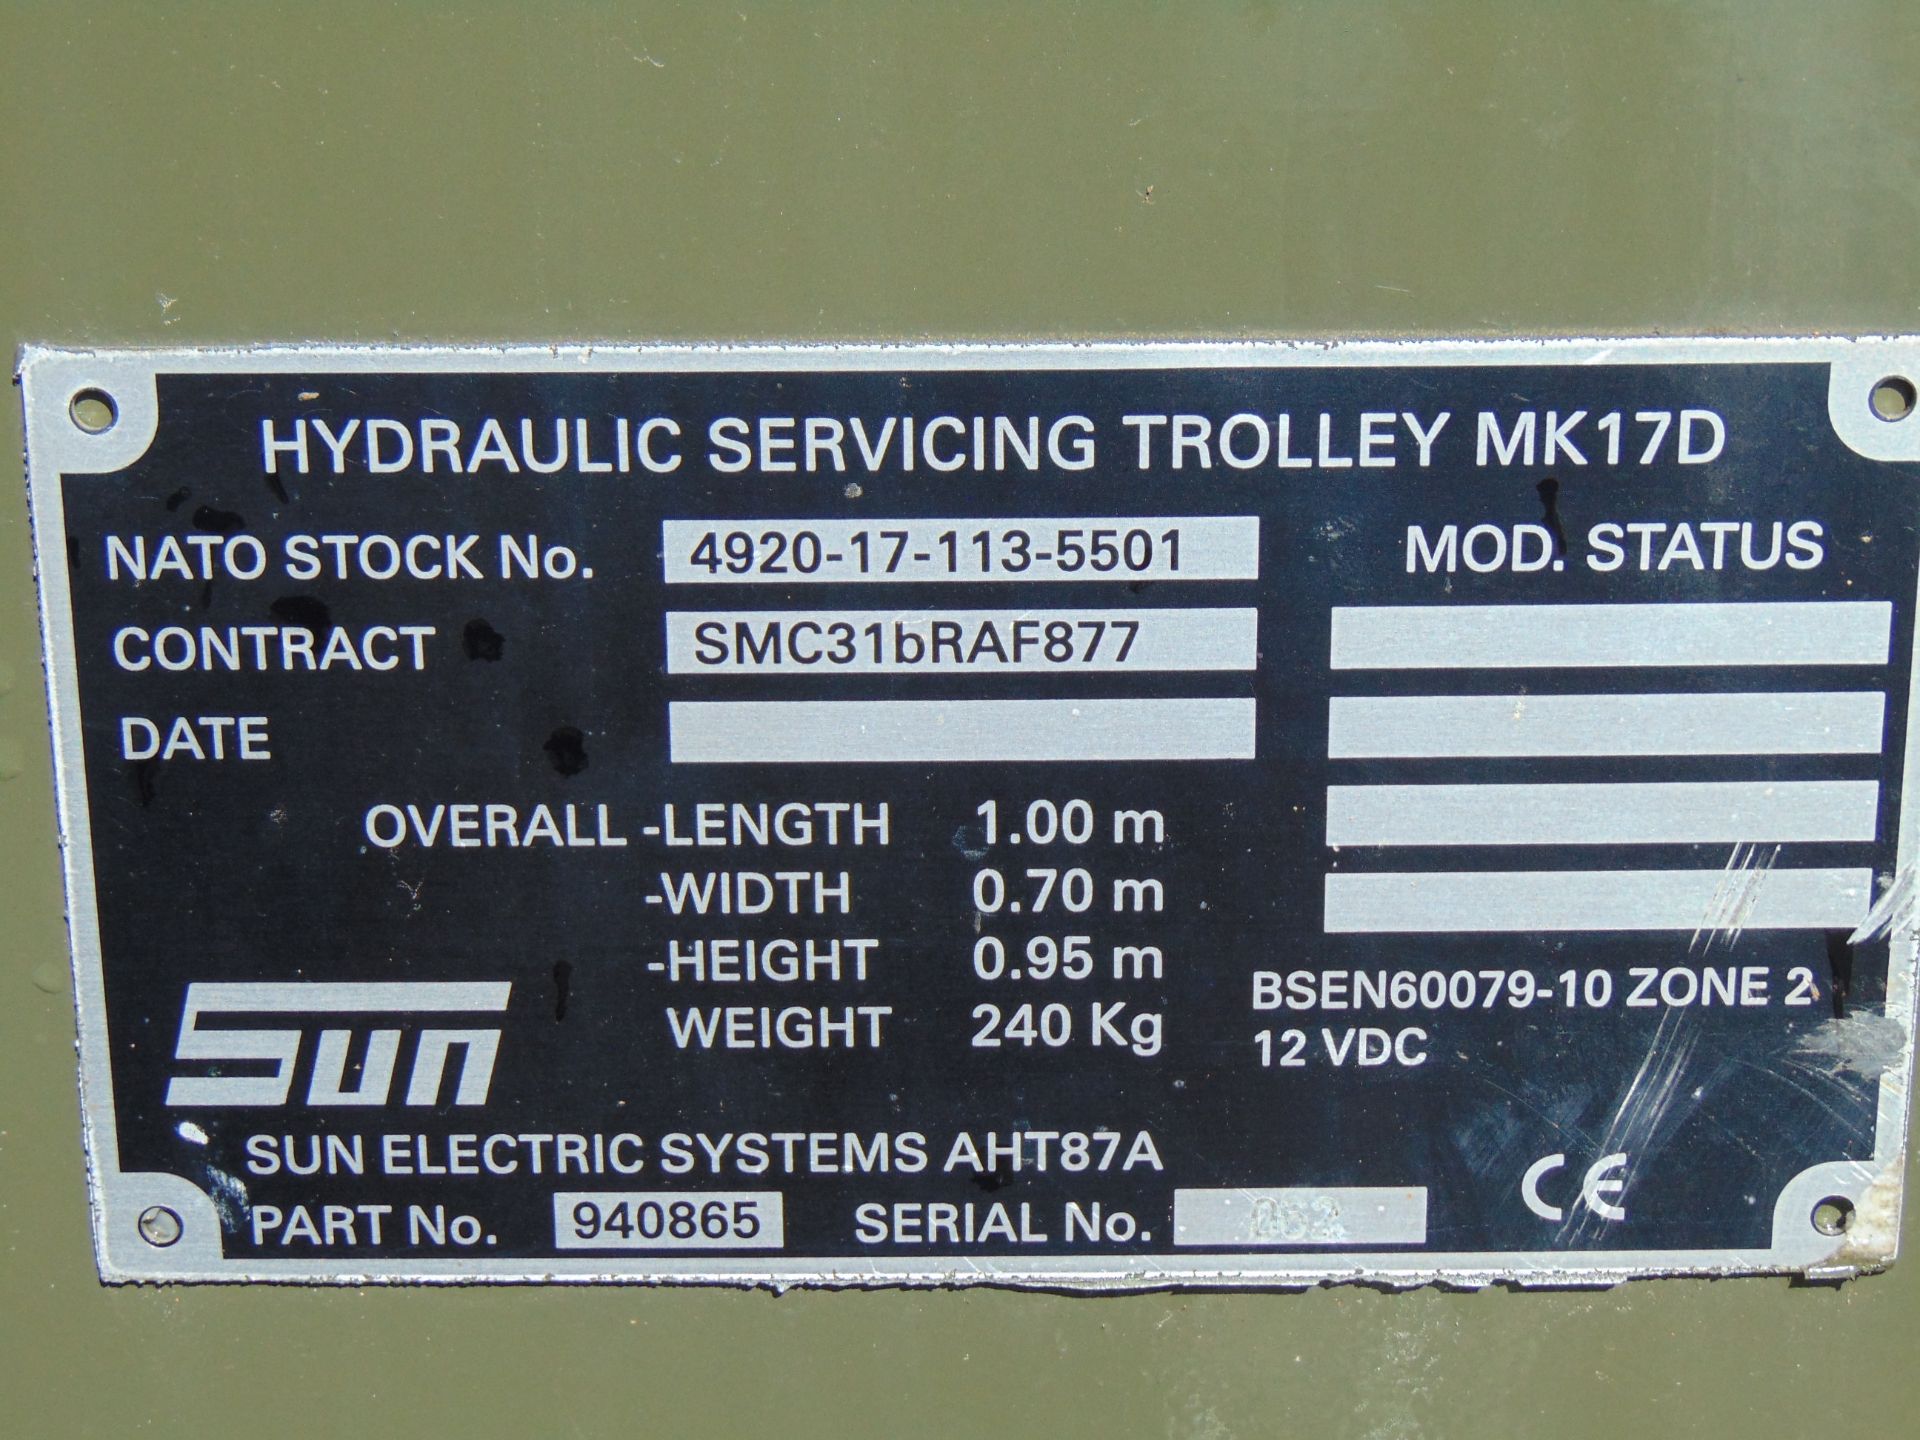 Sun AHT 87A Hydraulic Servicing Trolley from R.A.F. - Image 17 of 17